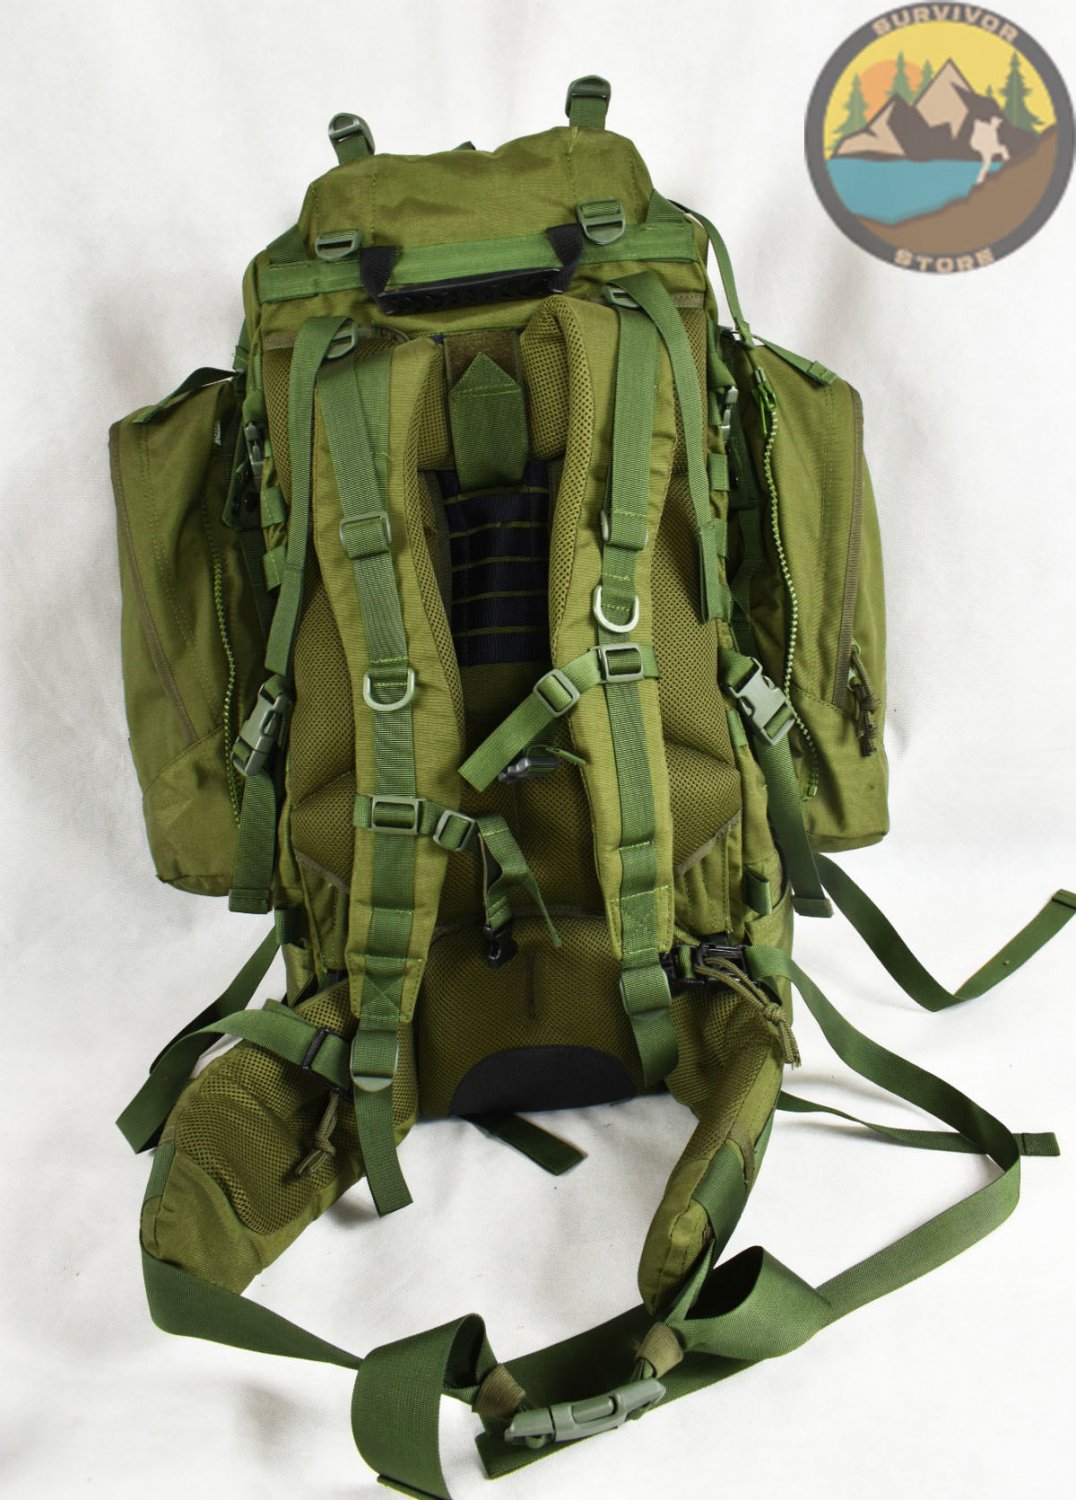 Special Forces Army Tactical Backpack Military Rucksack Green 80-100L NEW!